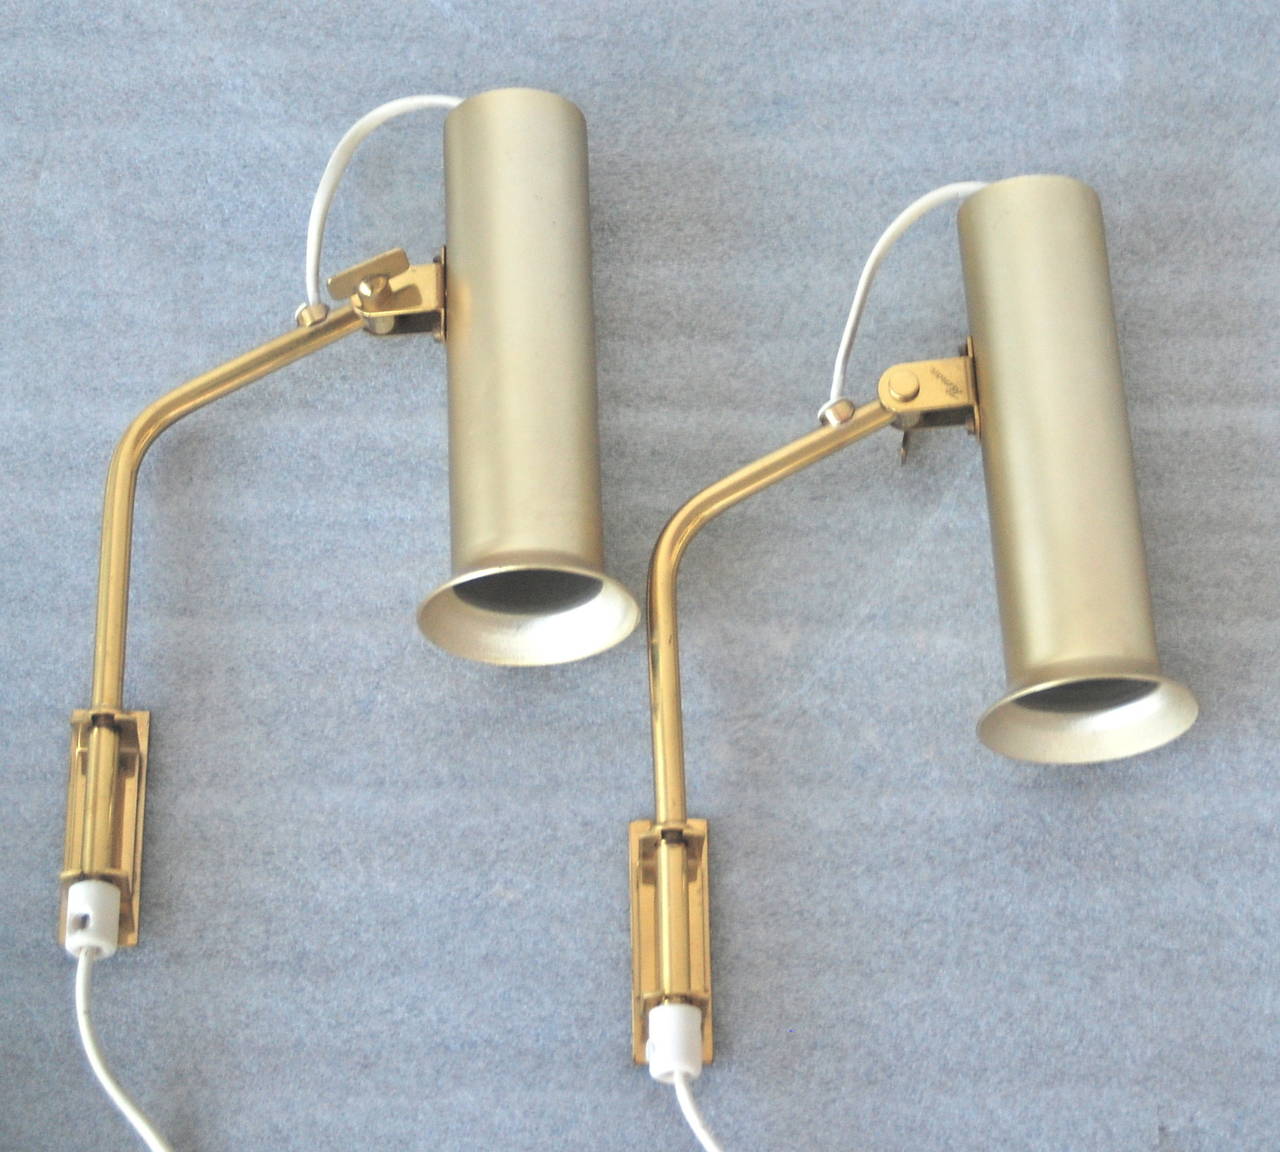 A pair of wall lamp manufactured by Idman, Finland, circa 1950s.
Design by Mauri almari.  Marked - Idman. Featured in Idman catalog number 143.
Adjustable, coated aluminum shades with polished brass arms on brackets.
Measures: Overall height 11